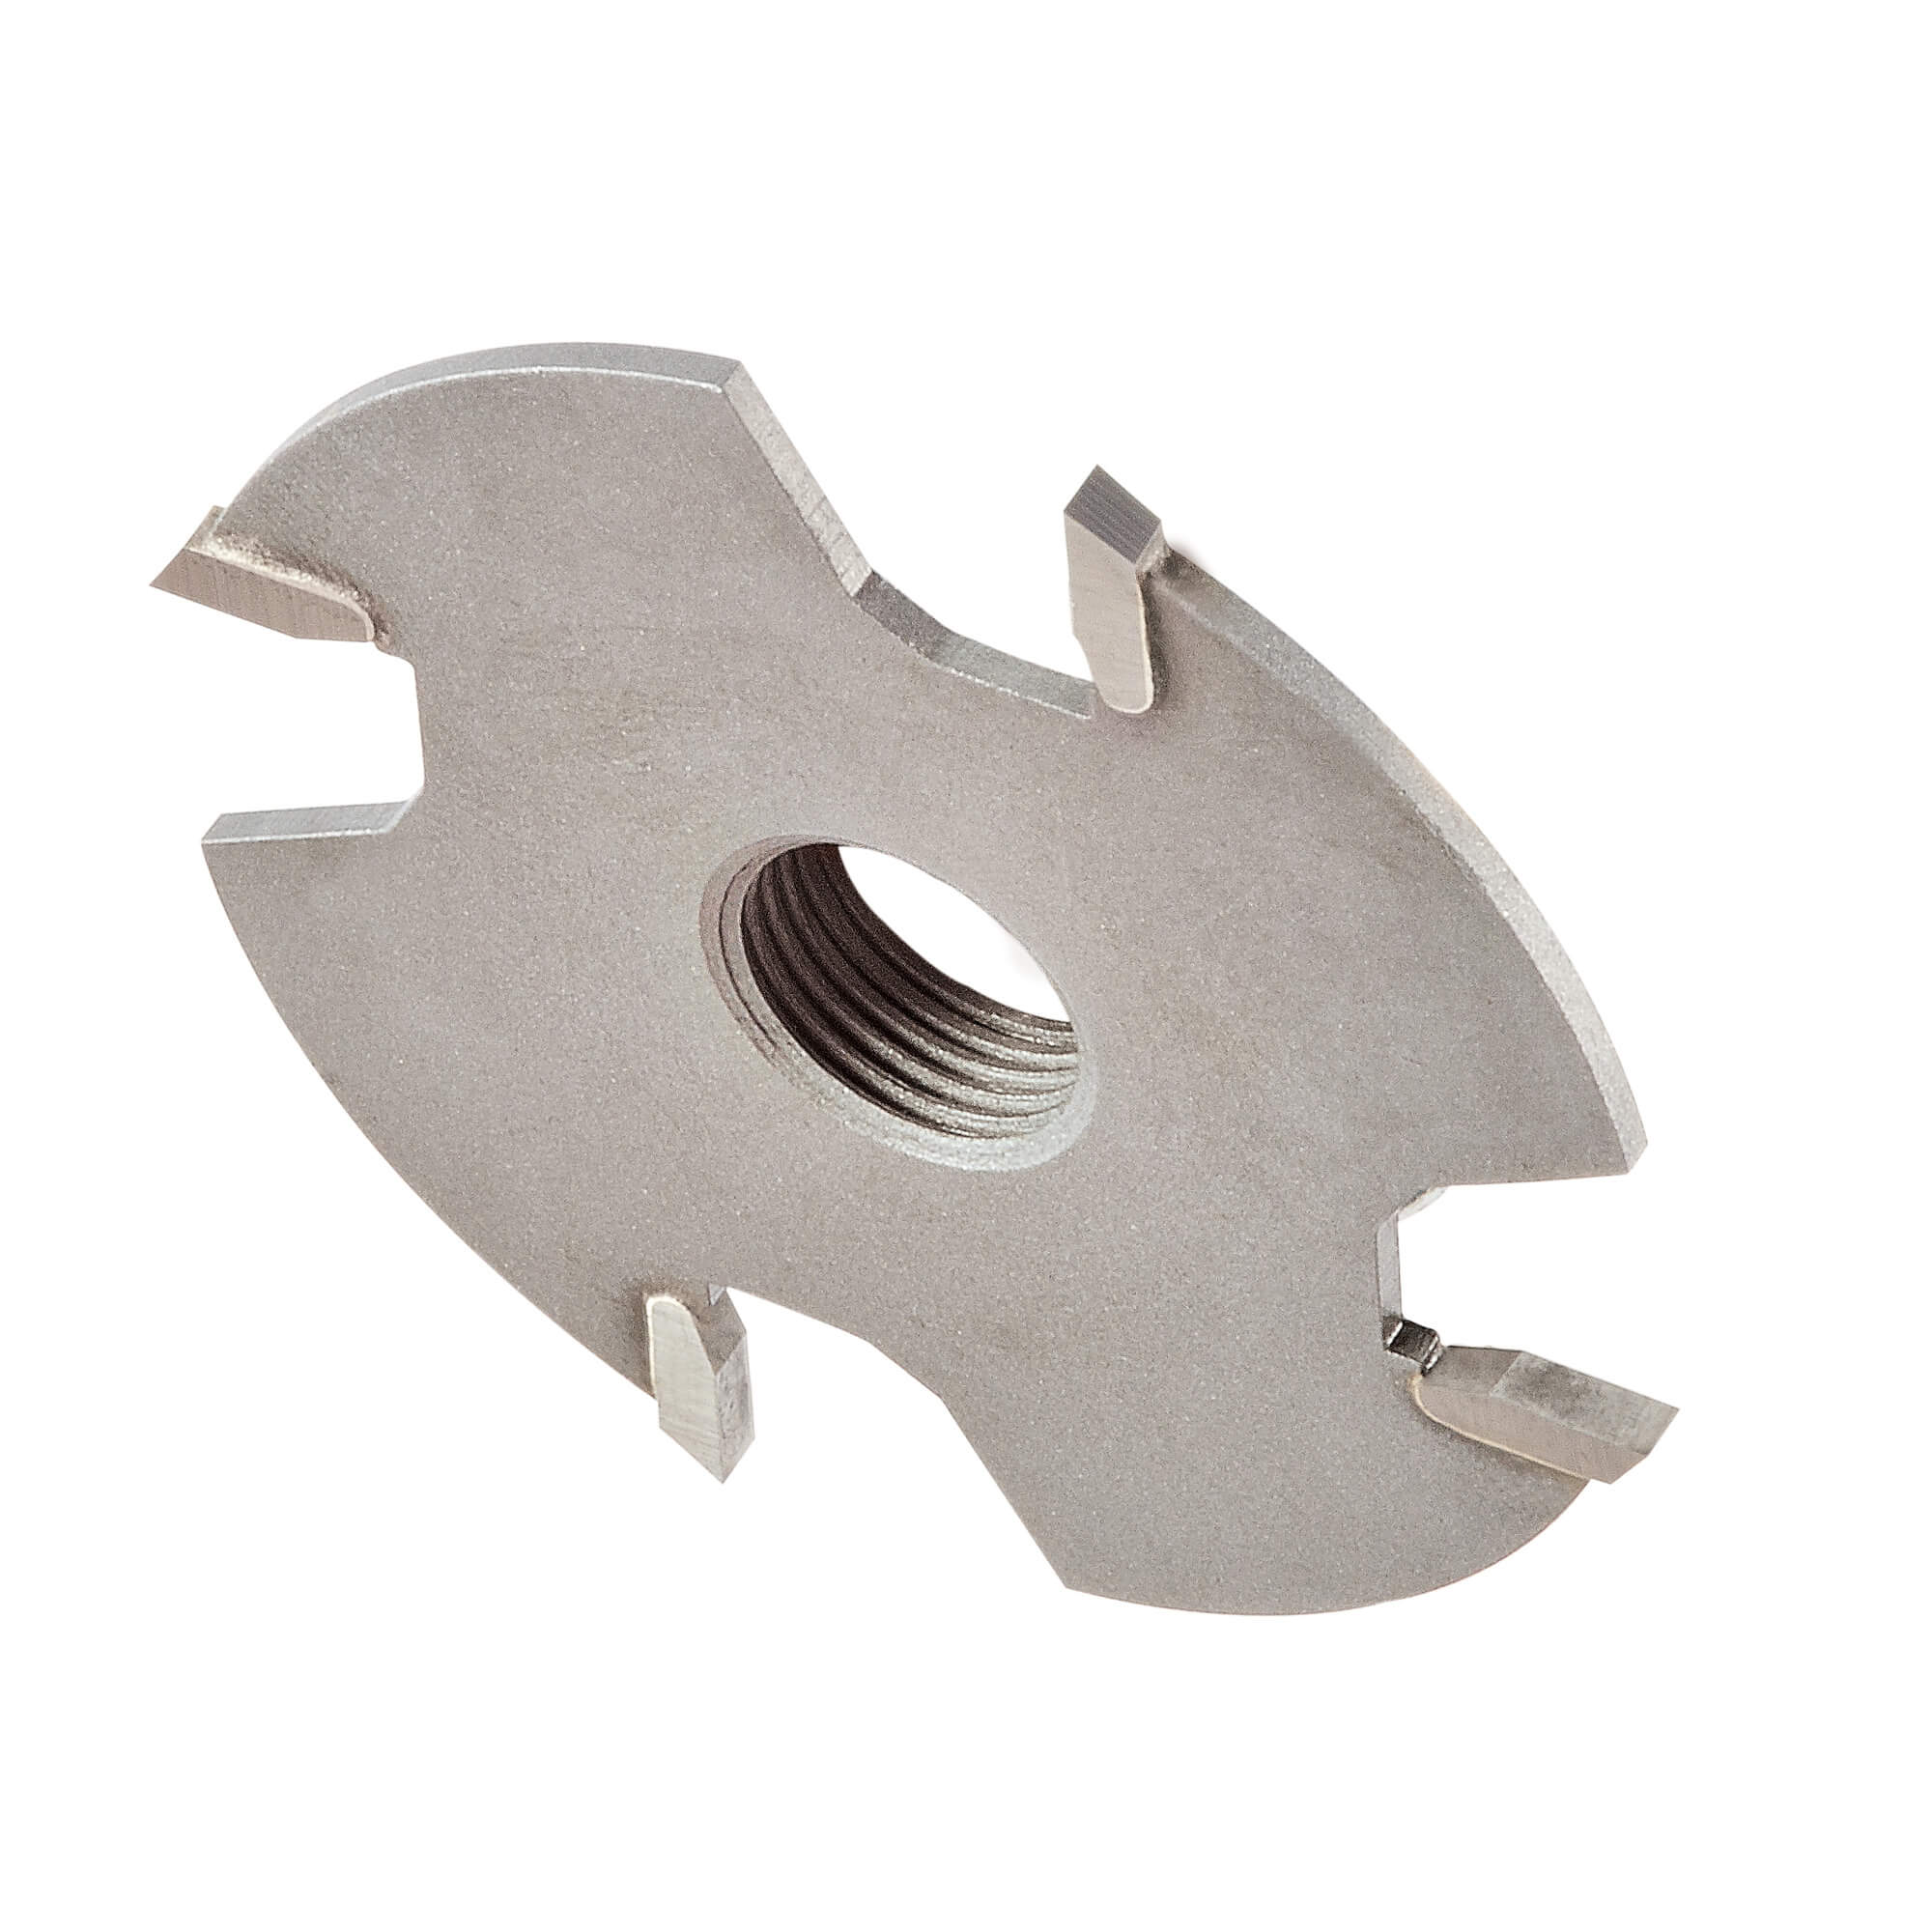 Image of Trend Threaded Slotter Blade for 33 Series M12 Arbors 50mm 2mm M12 Thread